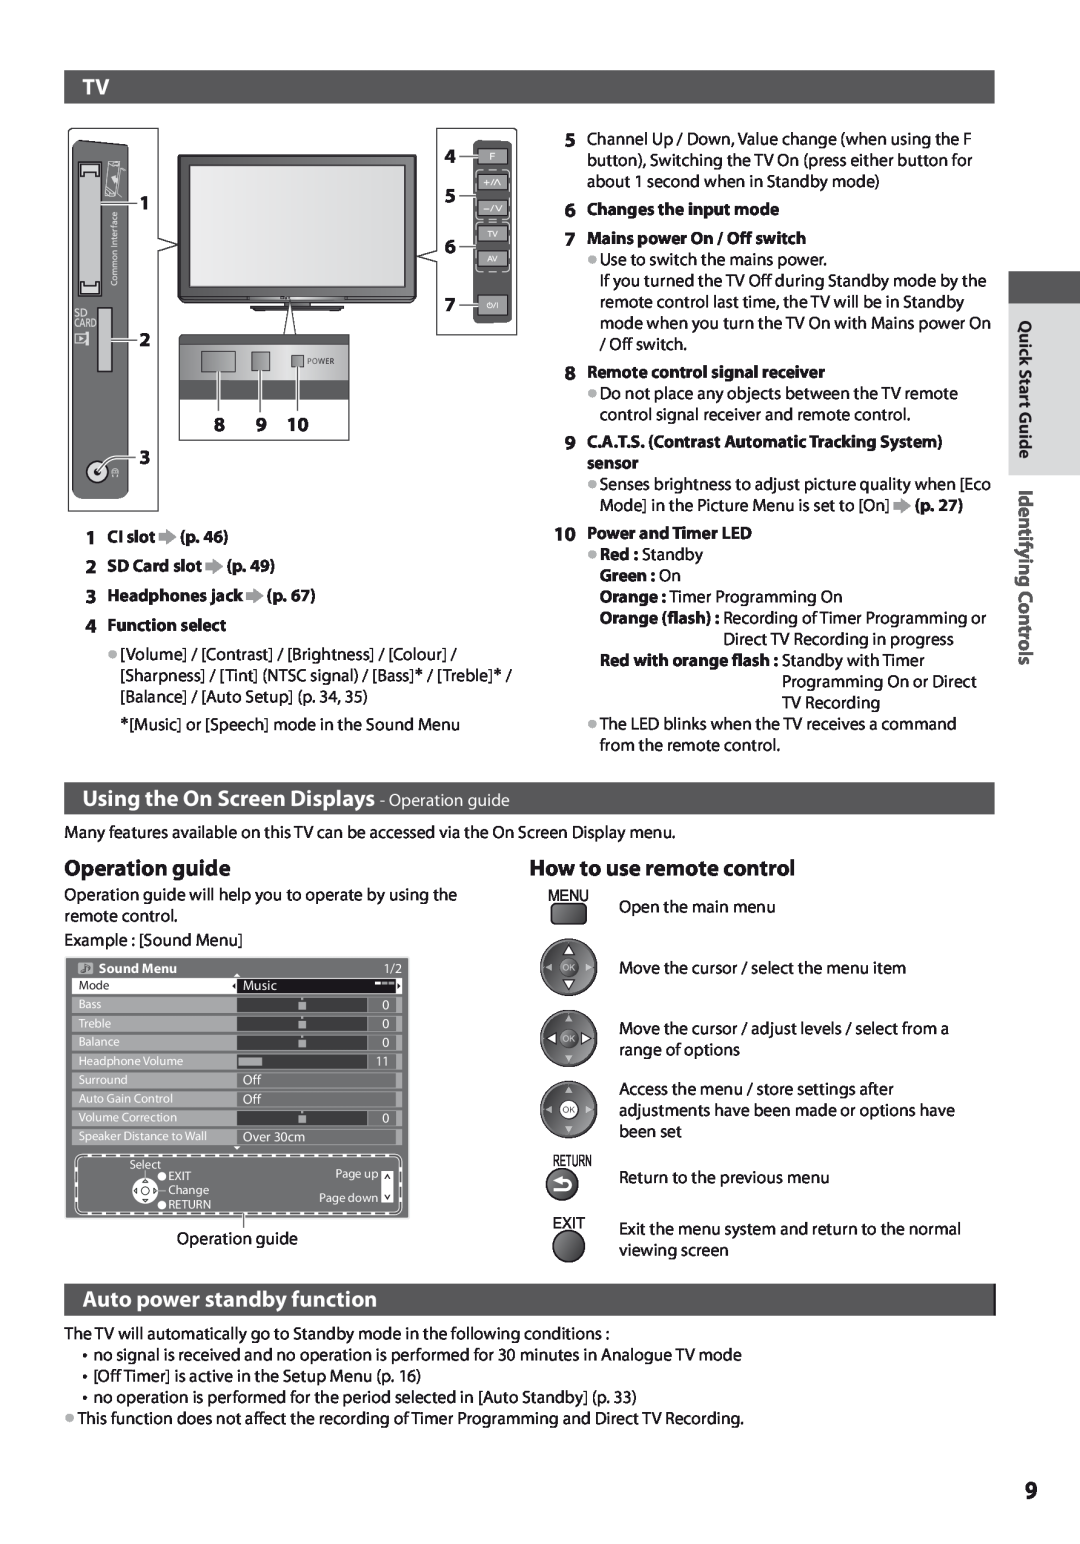 Panasonic TX-L42U3E Using the On Screen Displays - Operation guide, How to use remote control, Auto power standby function 